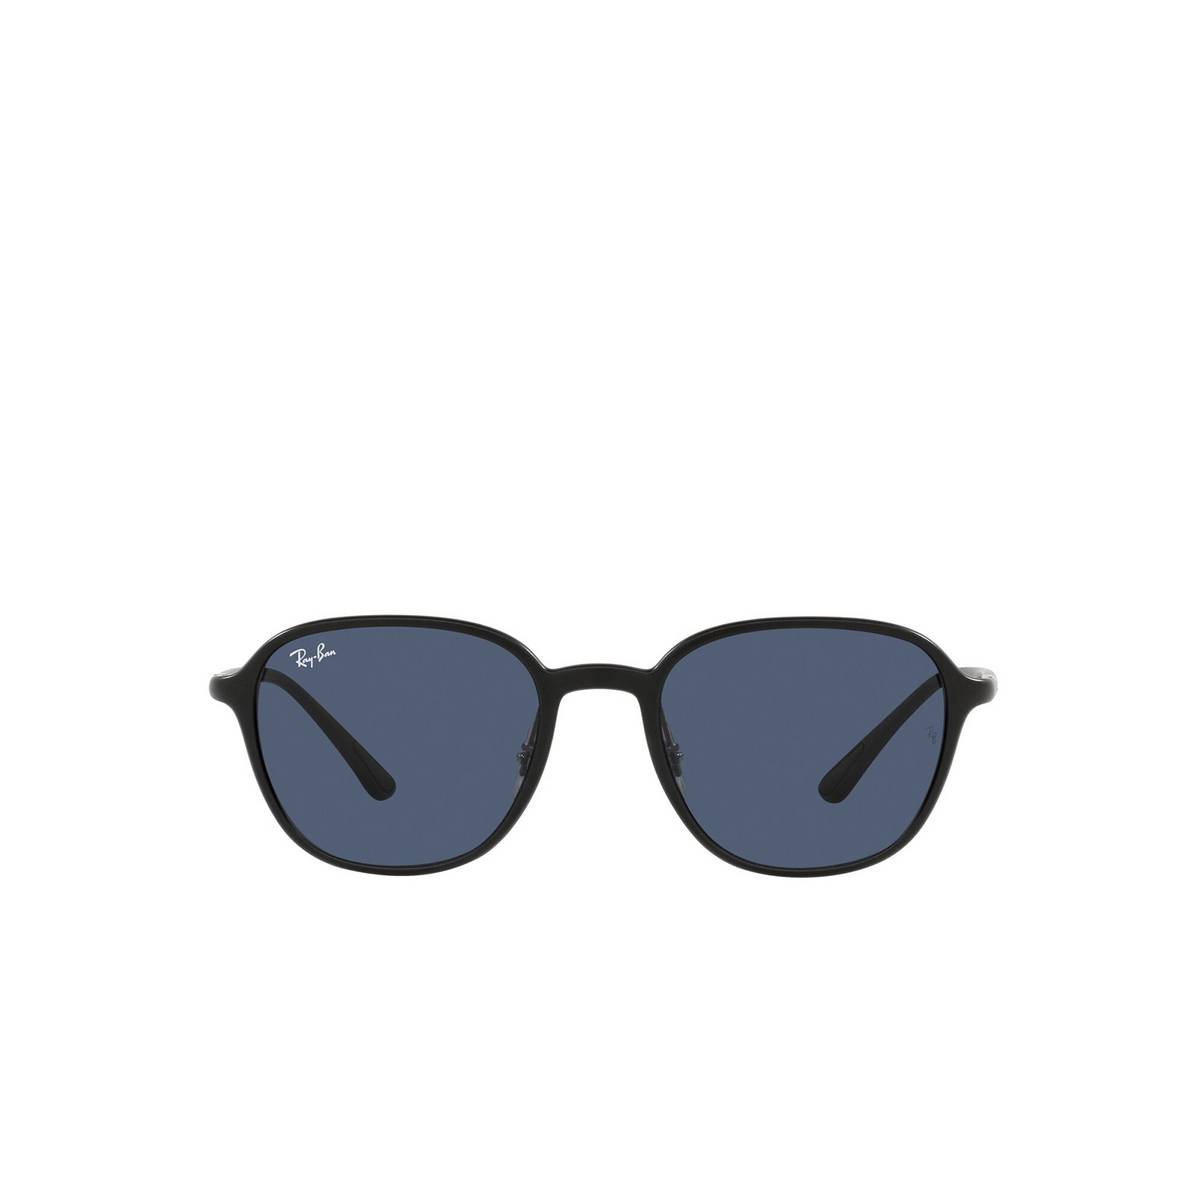 Ray-Ban® Square Sunglasses: RB4341 color Sanding Black 601S80 - front view.